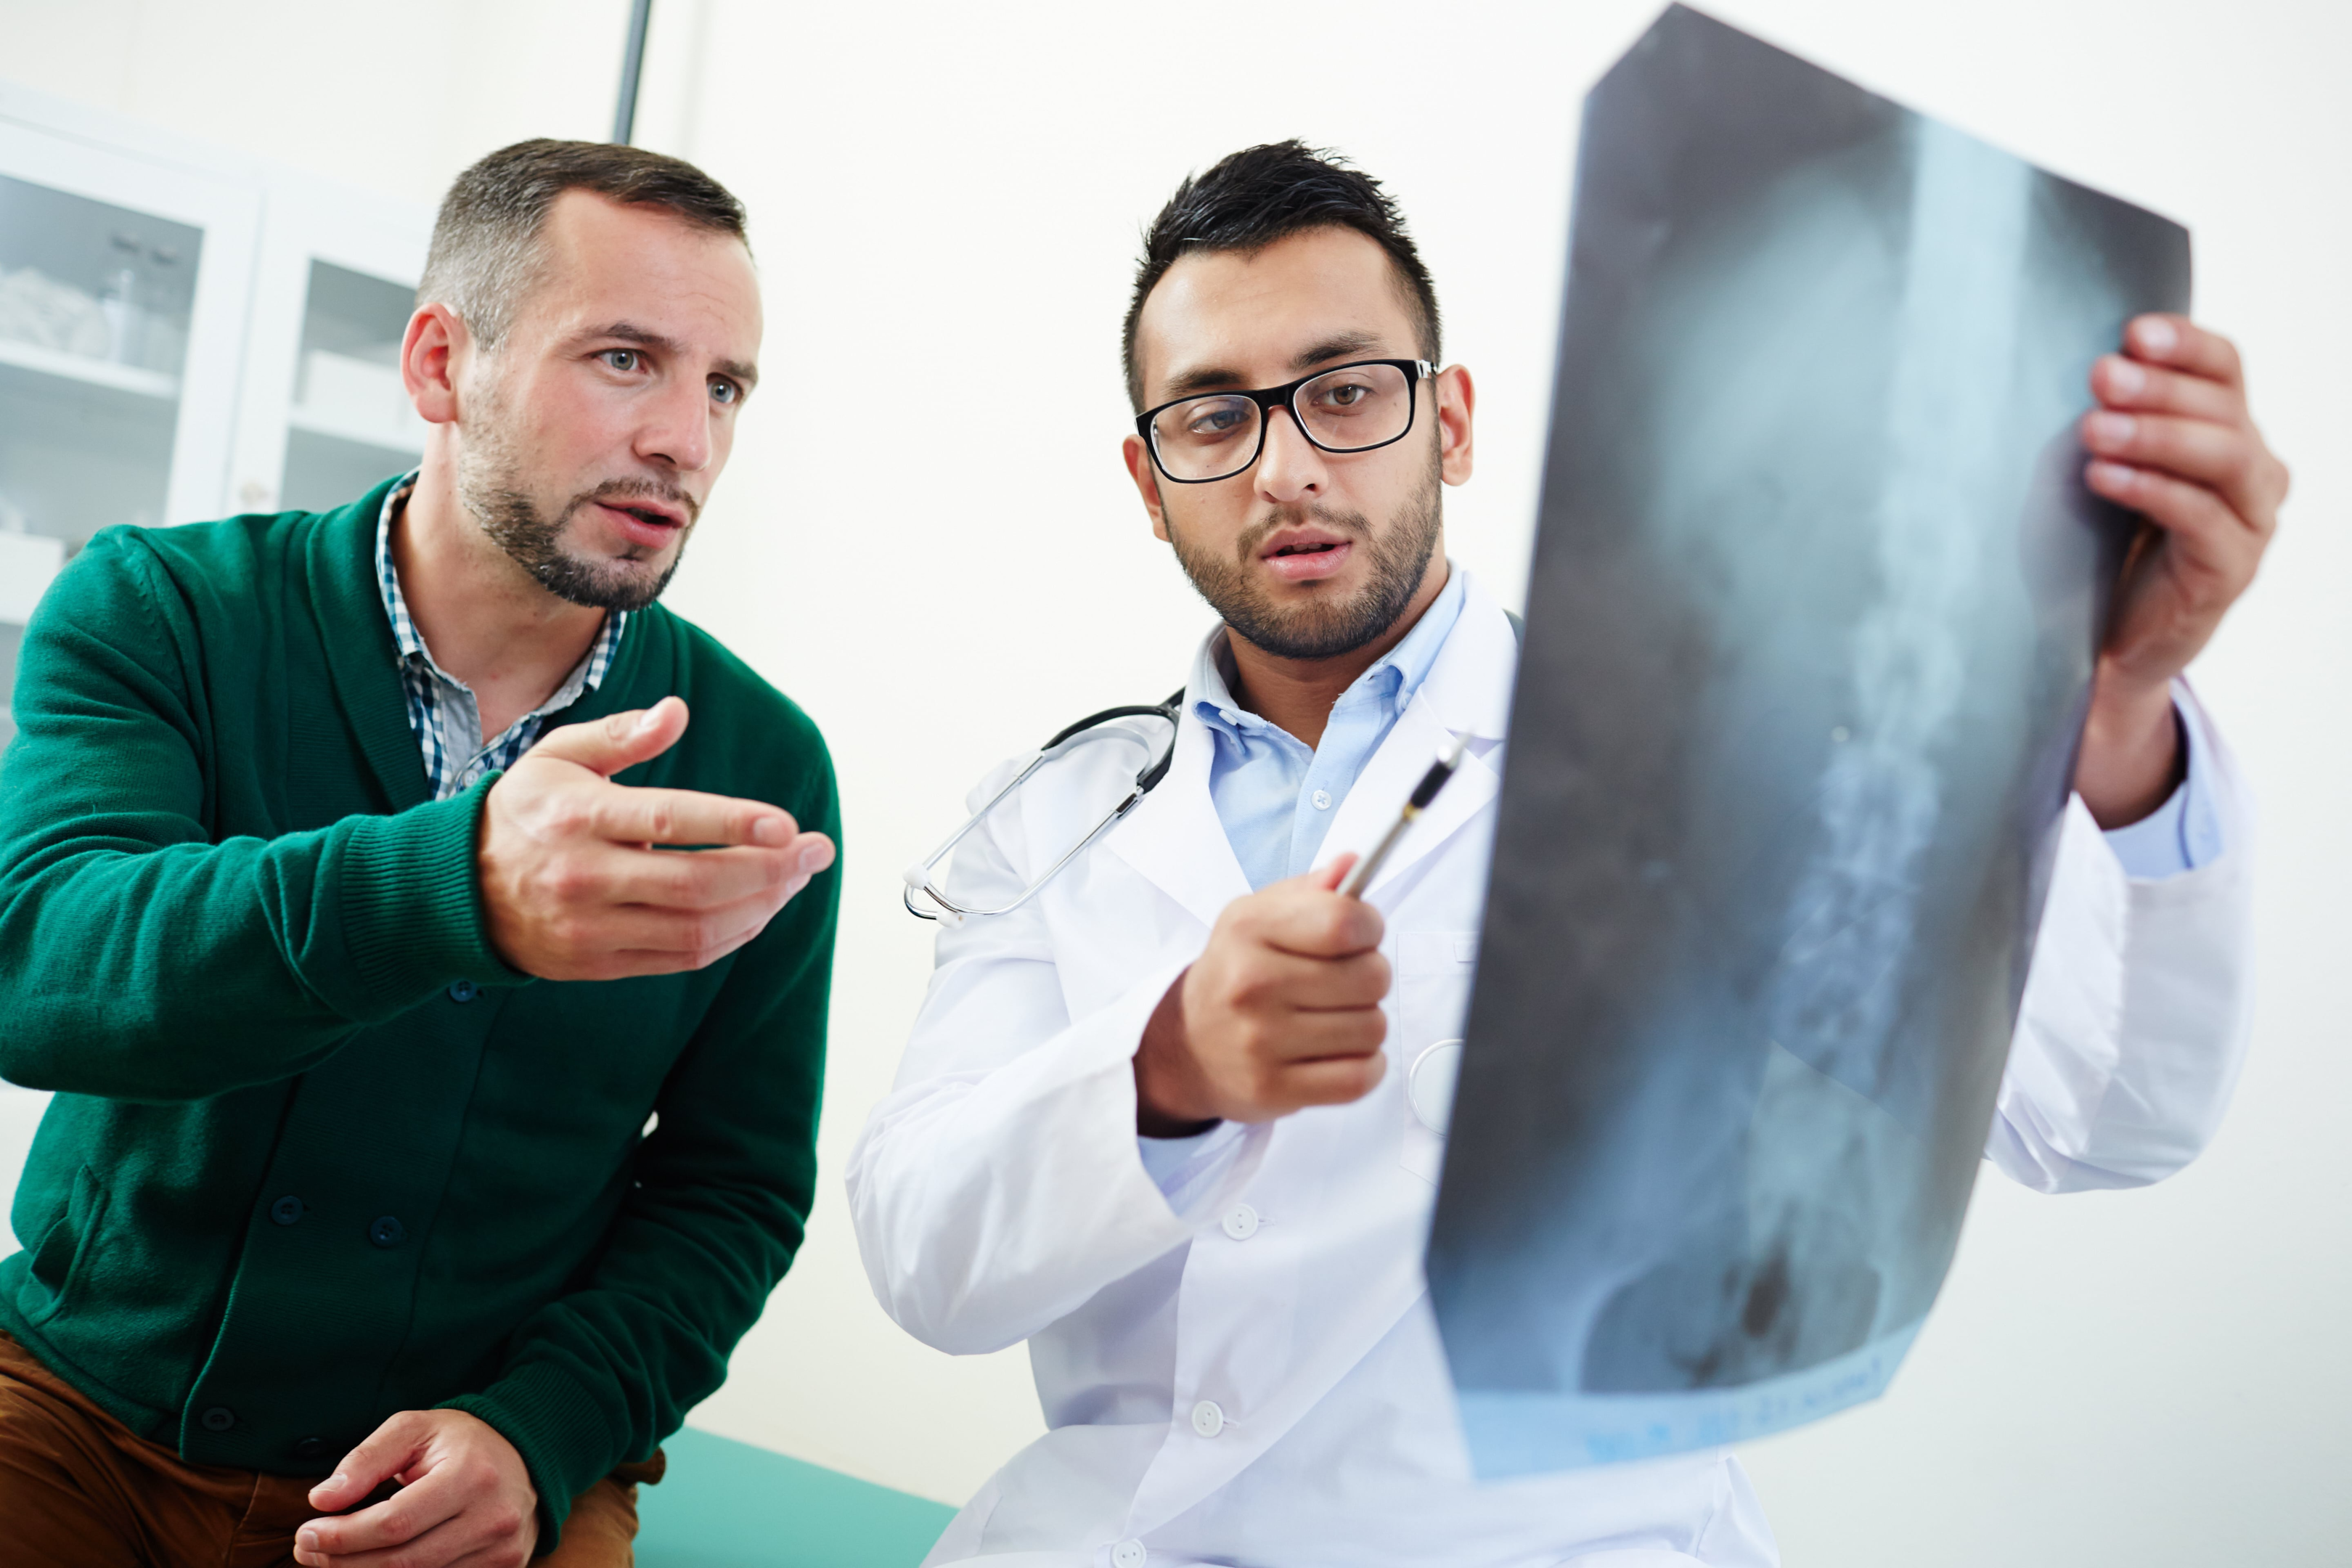 Man discussing results of imaging with a pain specialist. Doctor is holding up an MRI image.